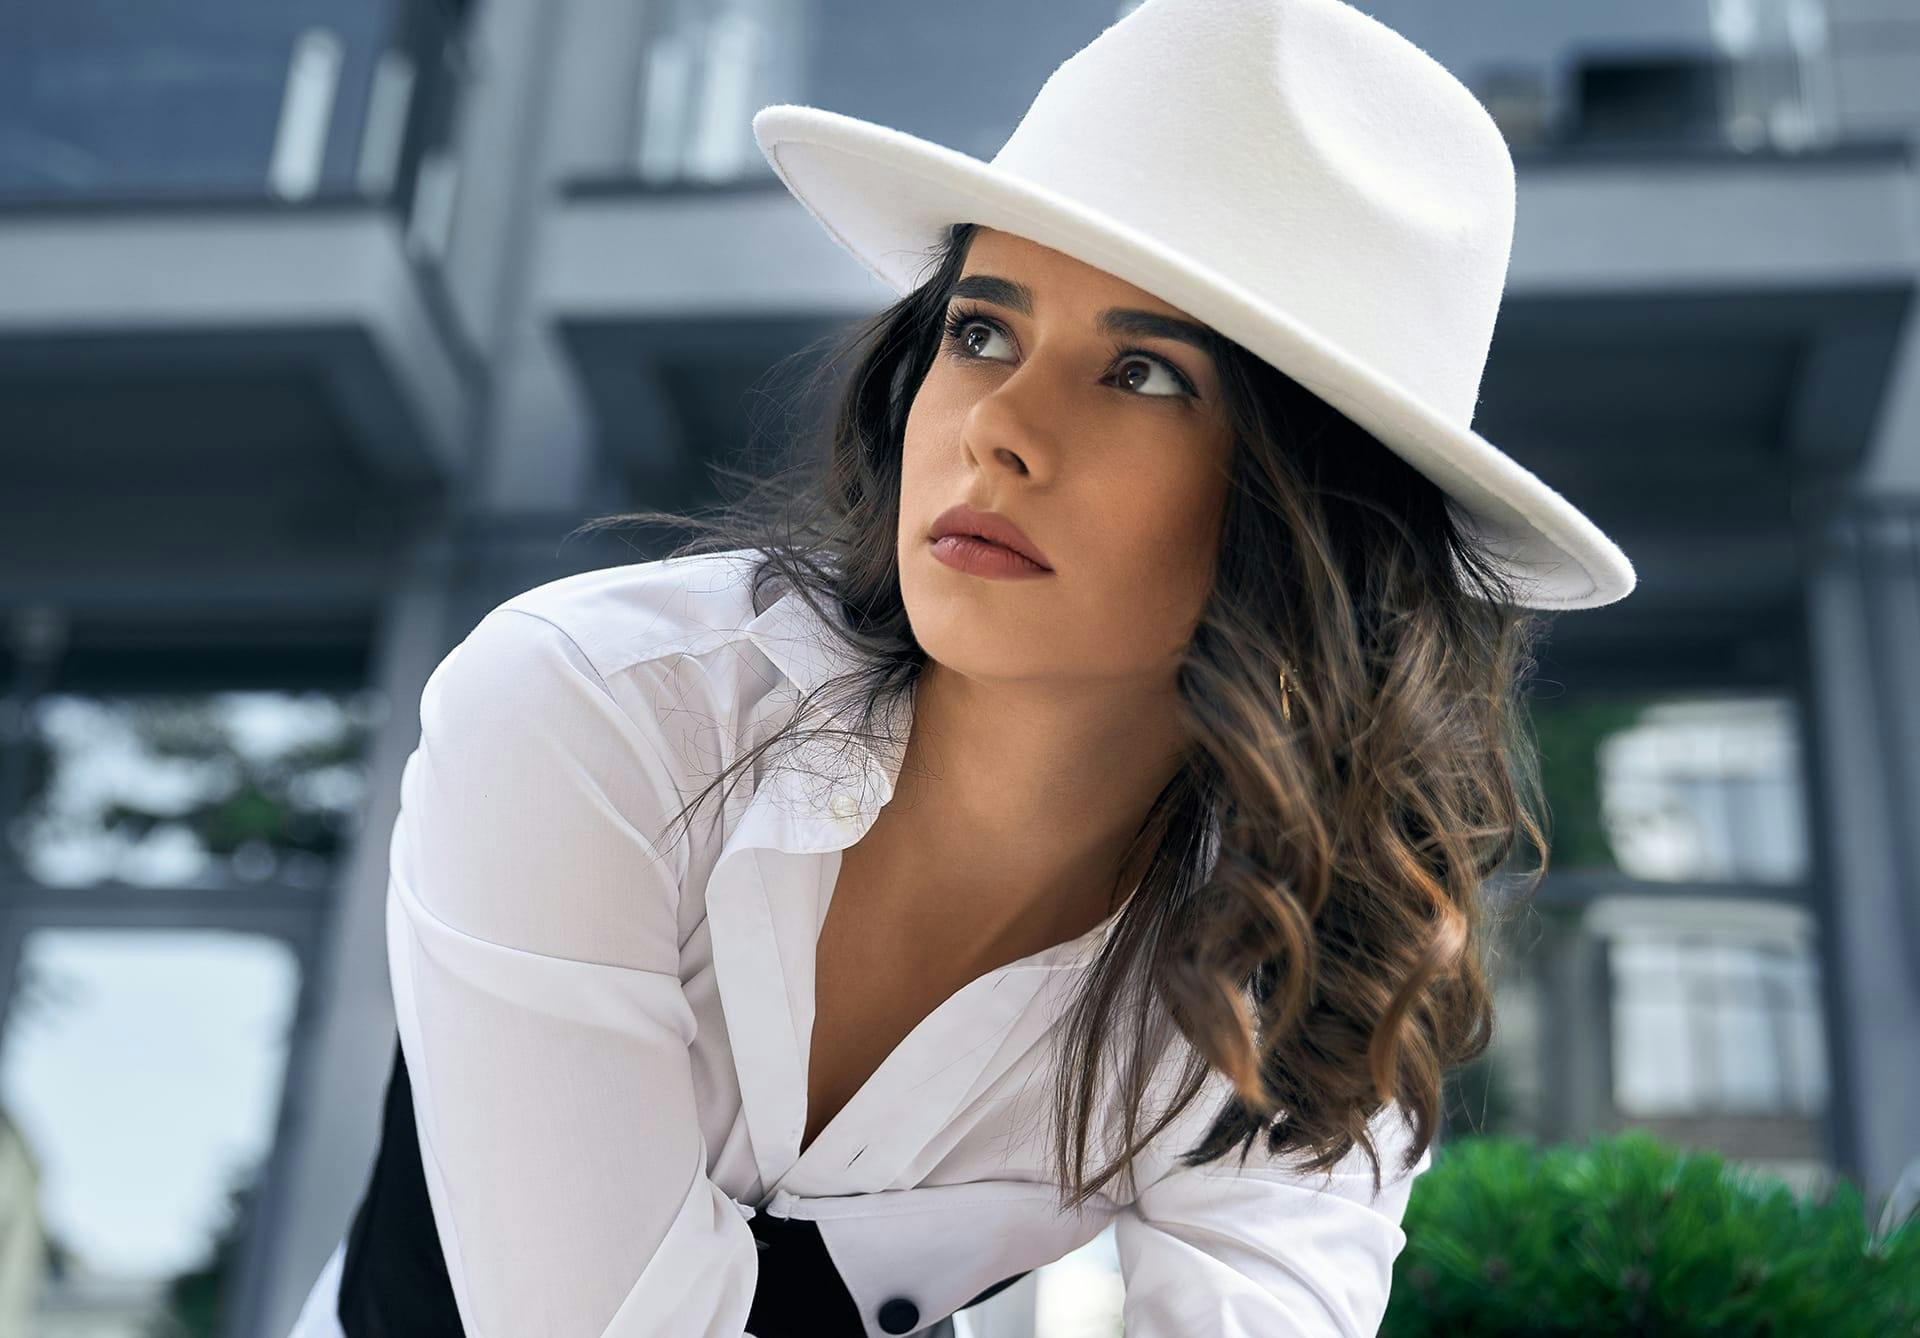 Woman with beautiful lips wearing a white hat and looking towards the sky.